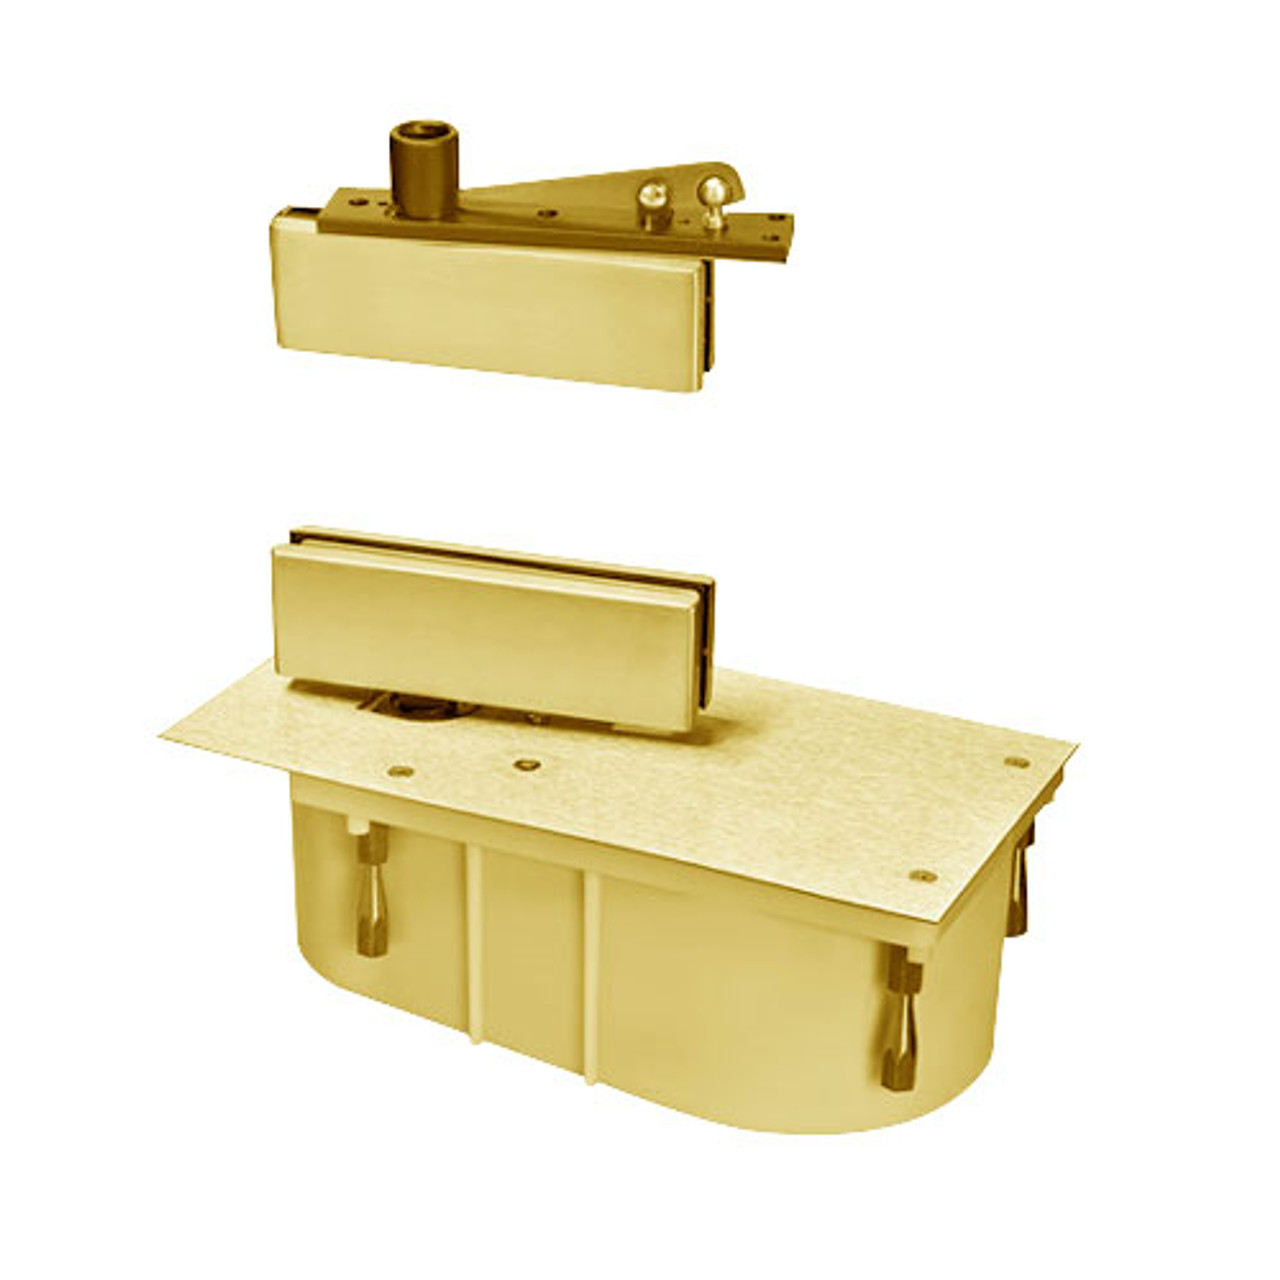 428-90N-LFP-RH-605 Rixson 428 Series Heavy Duty Single Acting Center Hung Floor Closer with Patch Fittings in Bright Brass Finish